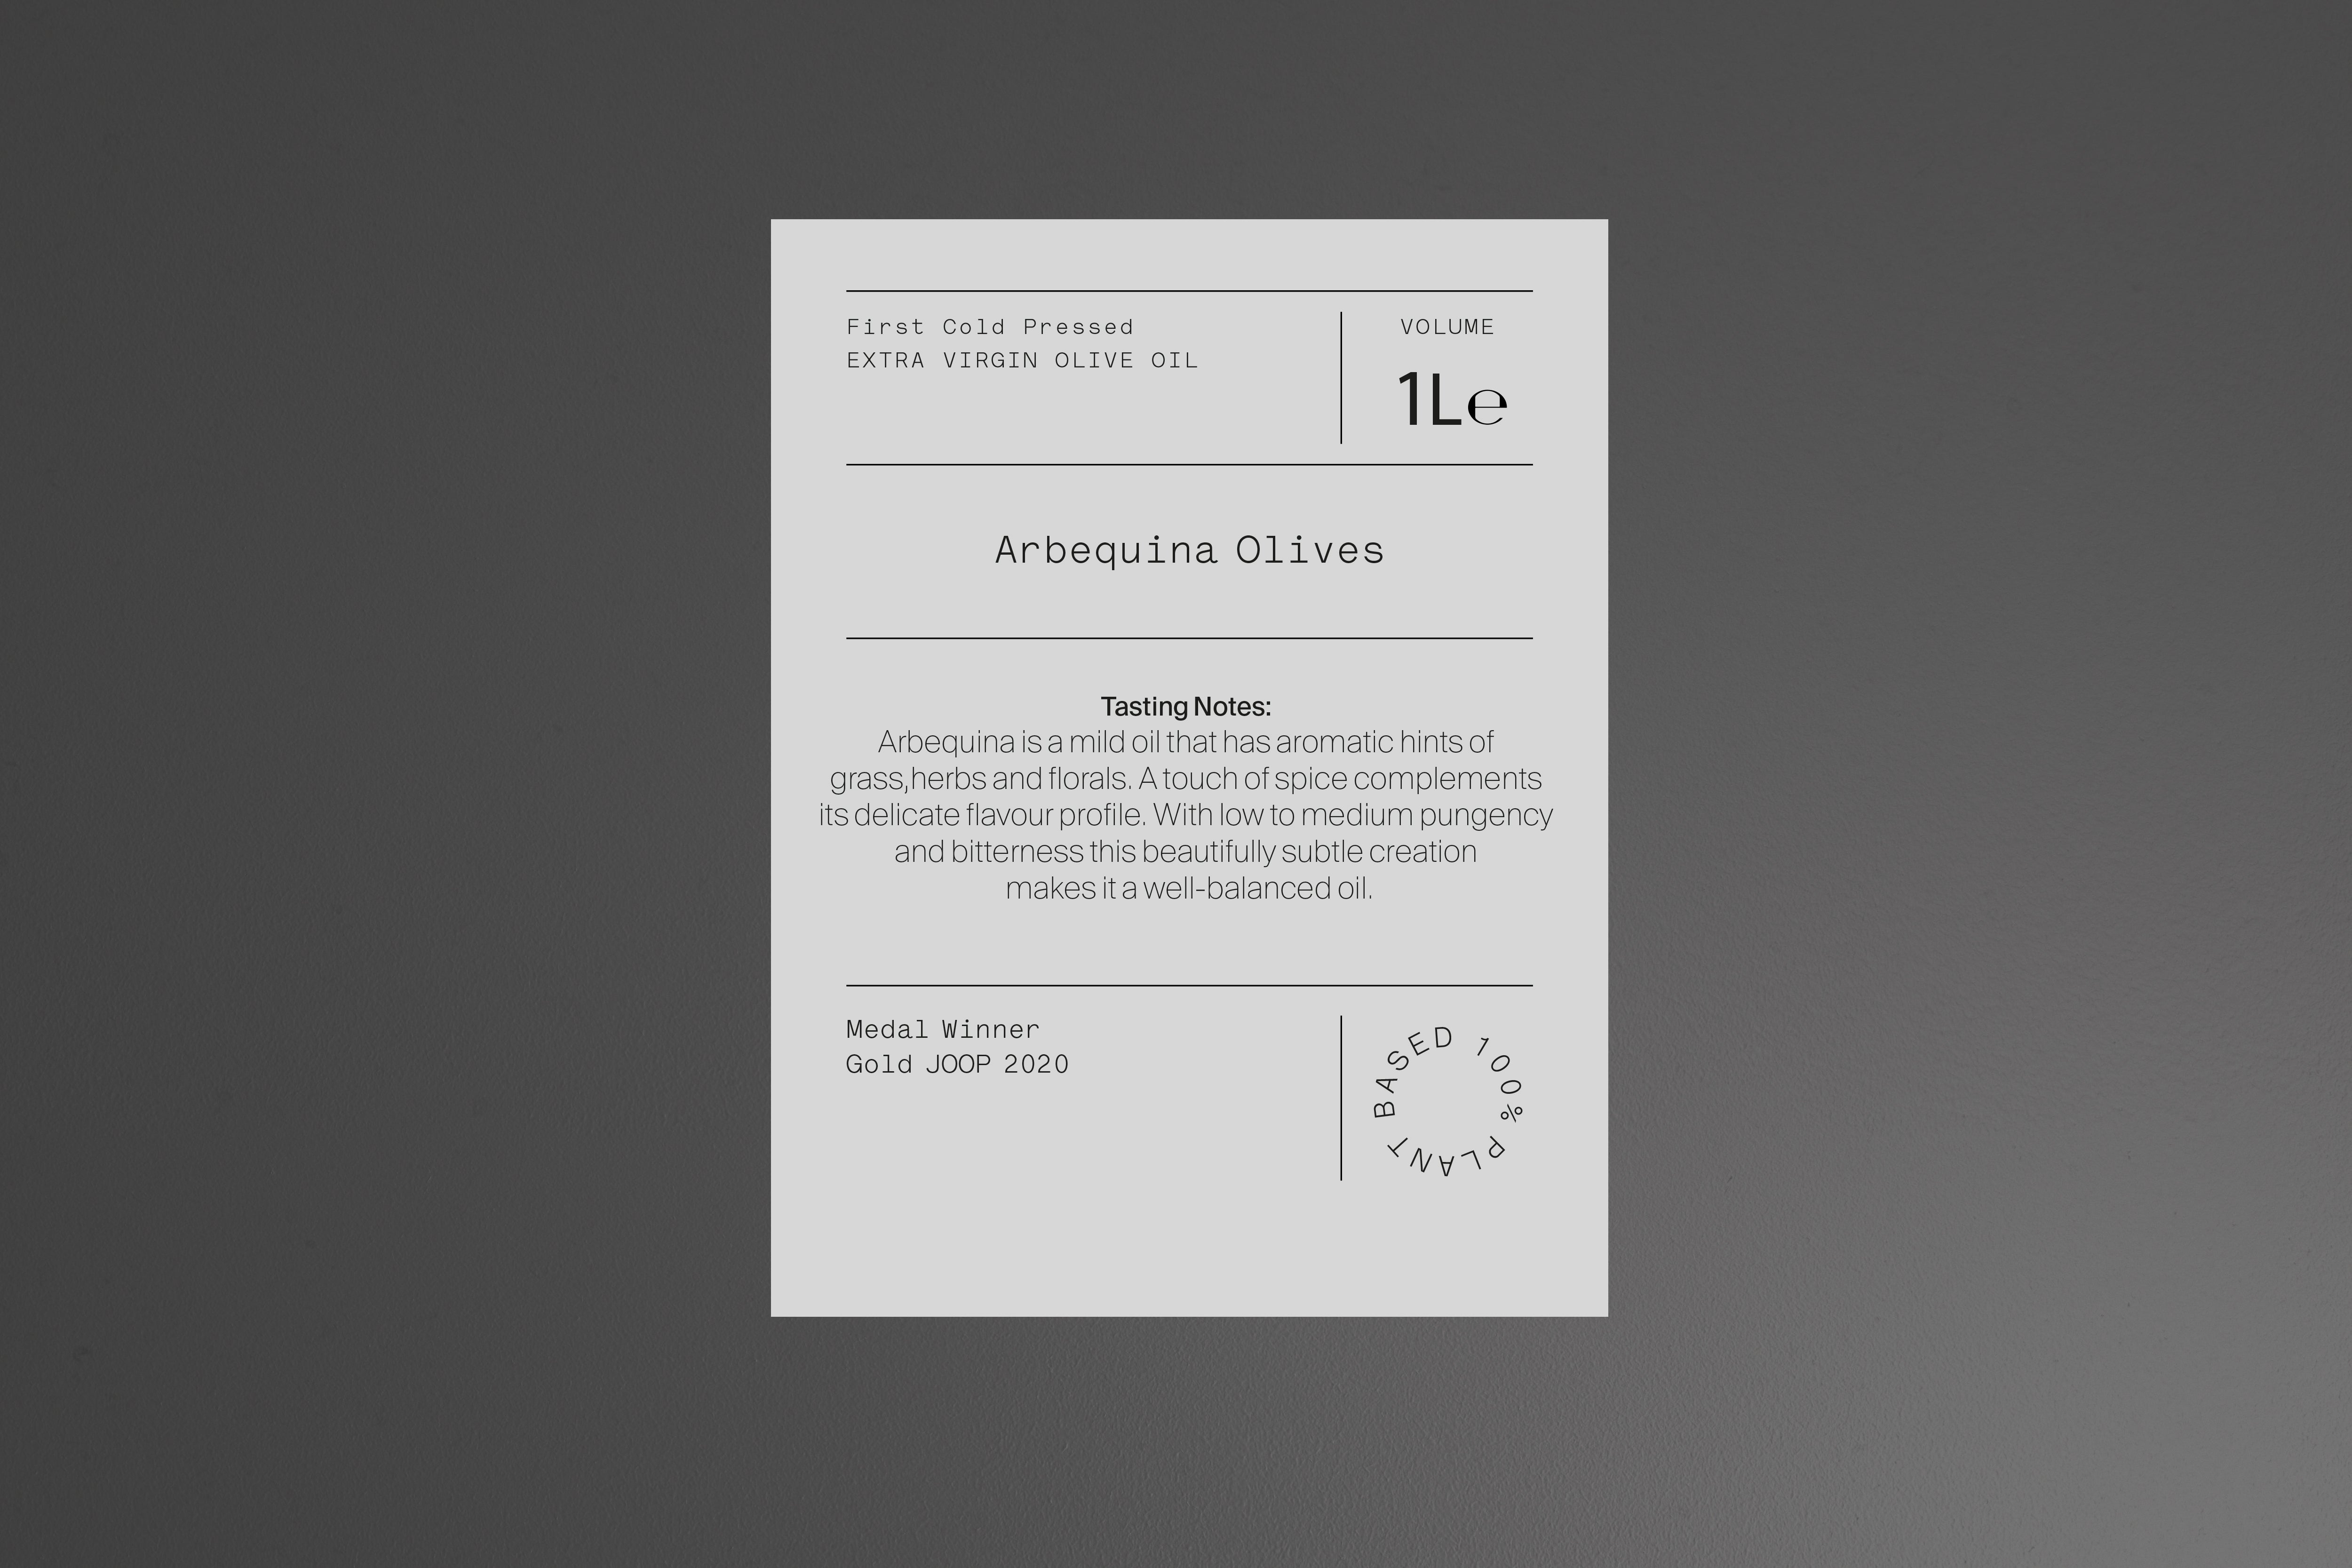 Tasting Notes: Arbequina is a mild oil that has aromatic hints of grass, herbs and florals. A touch of spice complements its delicate flavour profile. With low to medium pungency and bitterness this beautifully subtle creation makes it a well-balanced oil.